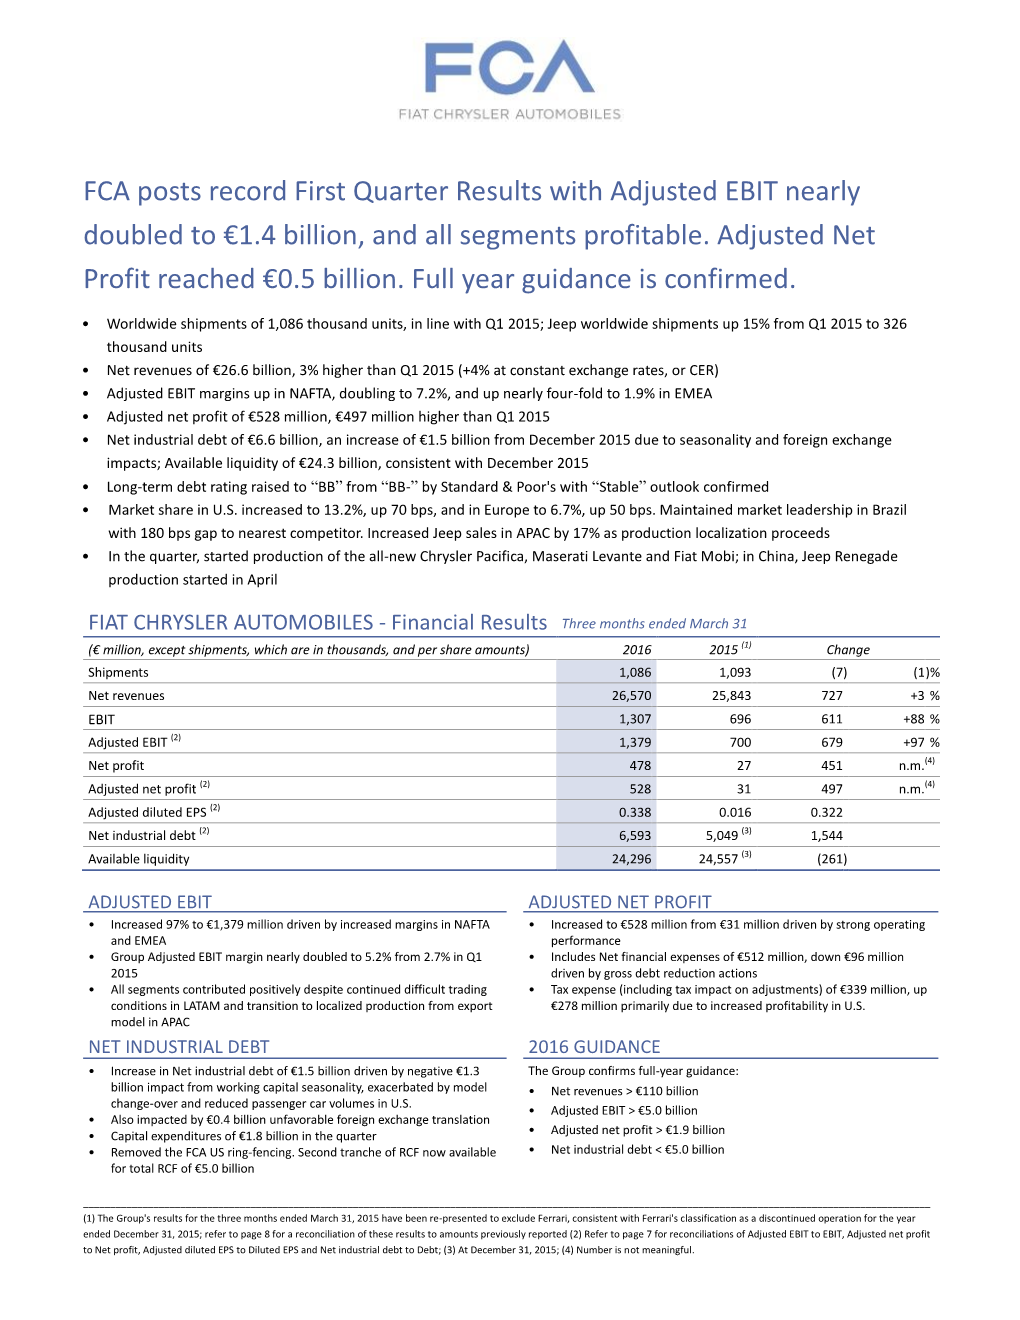 FCA Posts Record First Quarter Results with Adjusted EBIT Nearly Doubled to €1.4 Billion, and All Segments Profitable